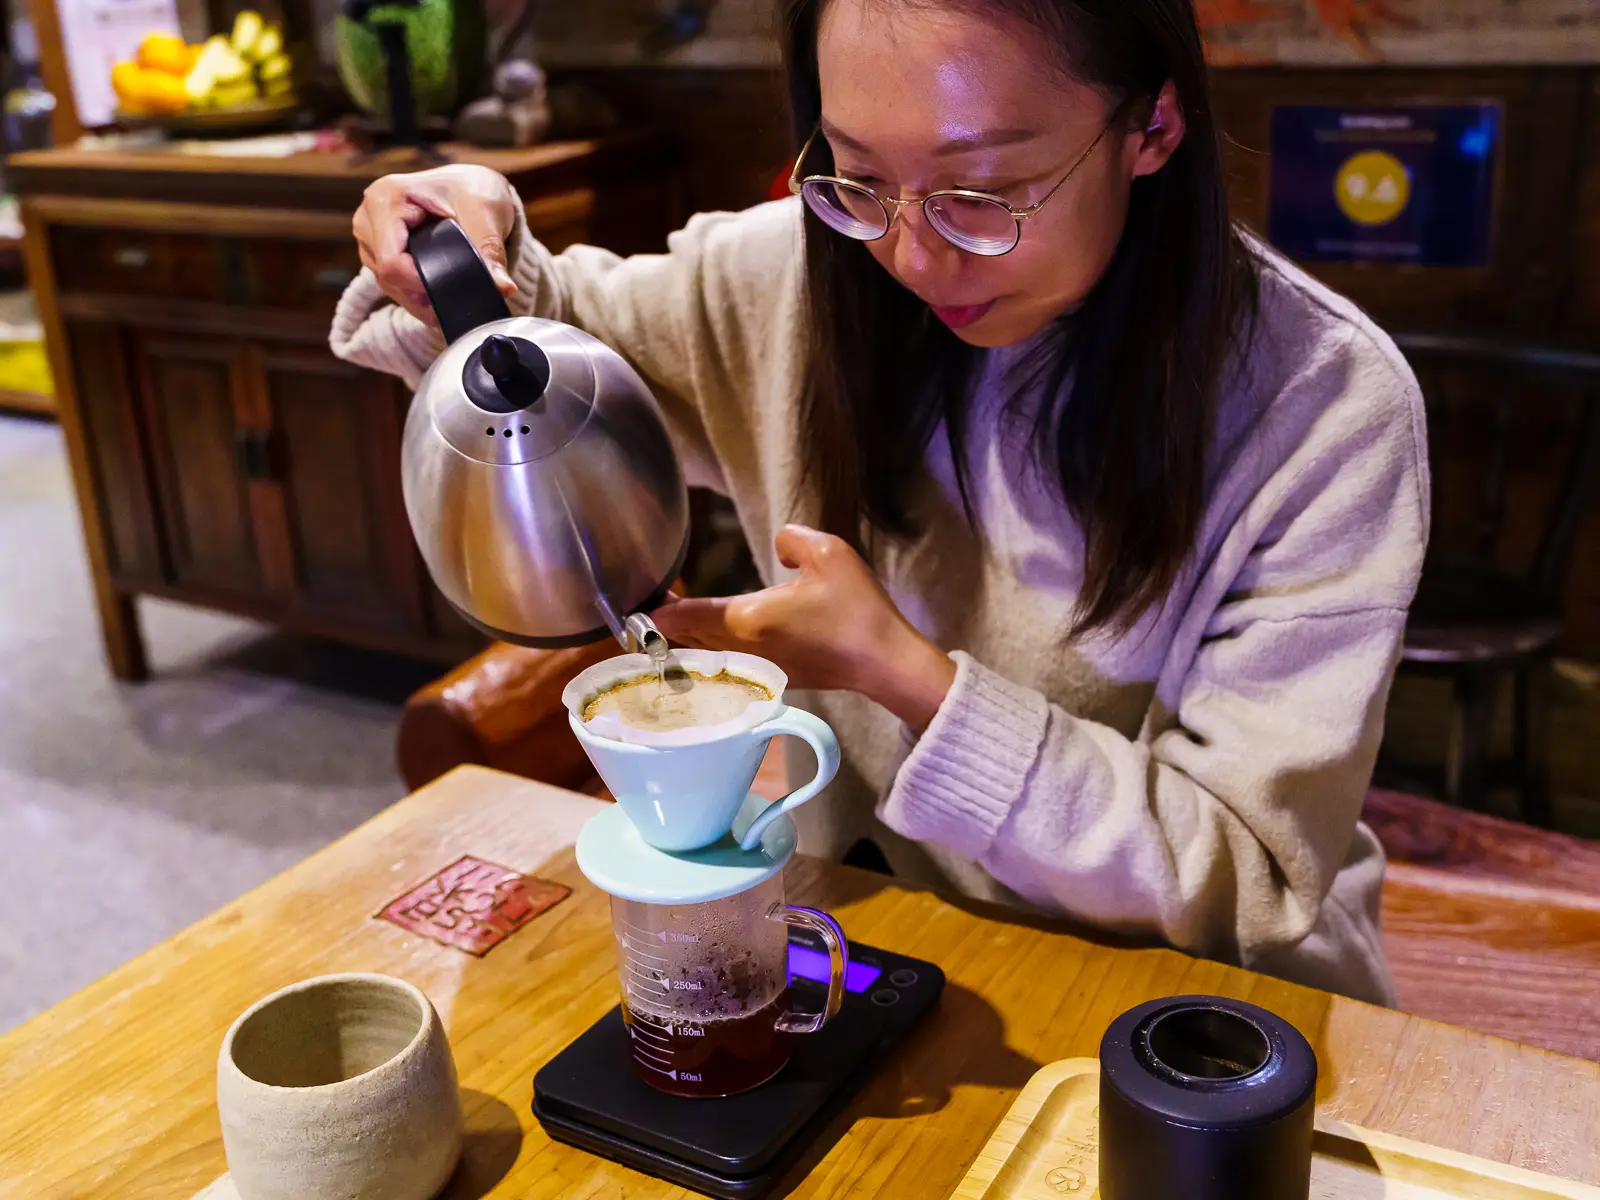 A cup of pour-over coffee is being brewed.